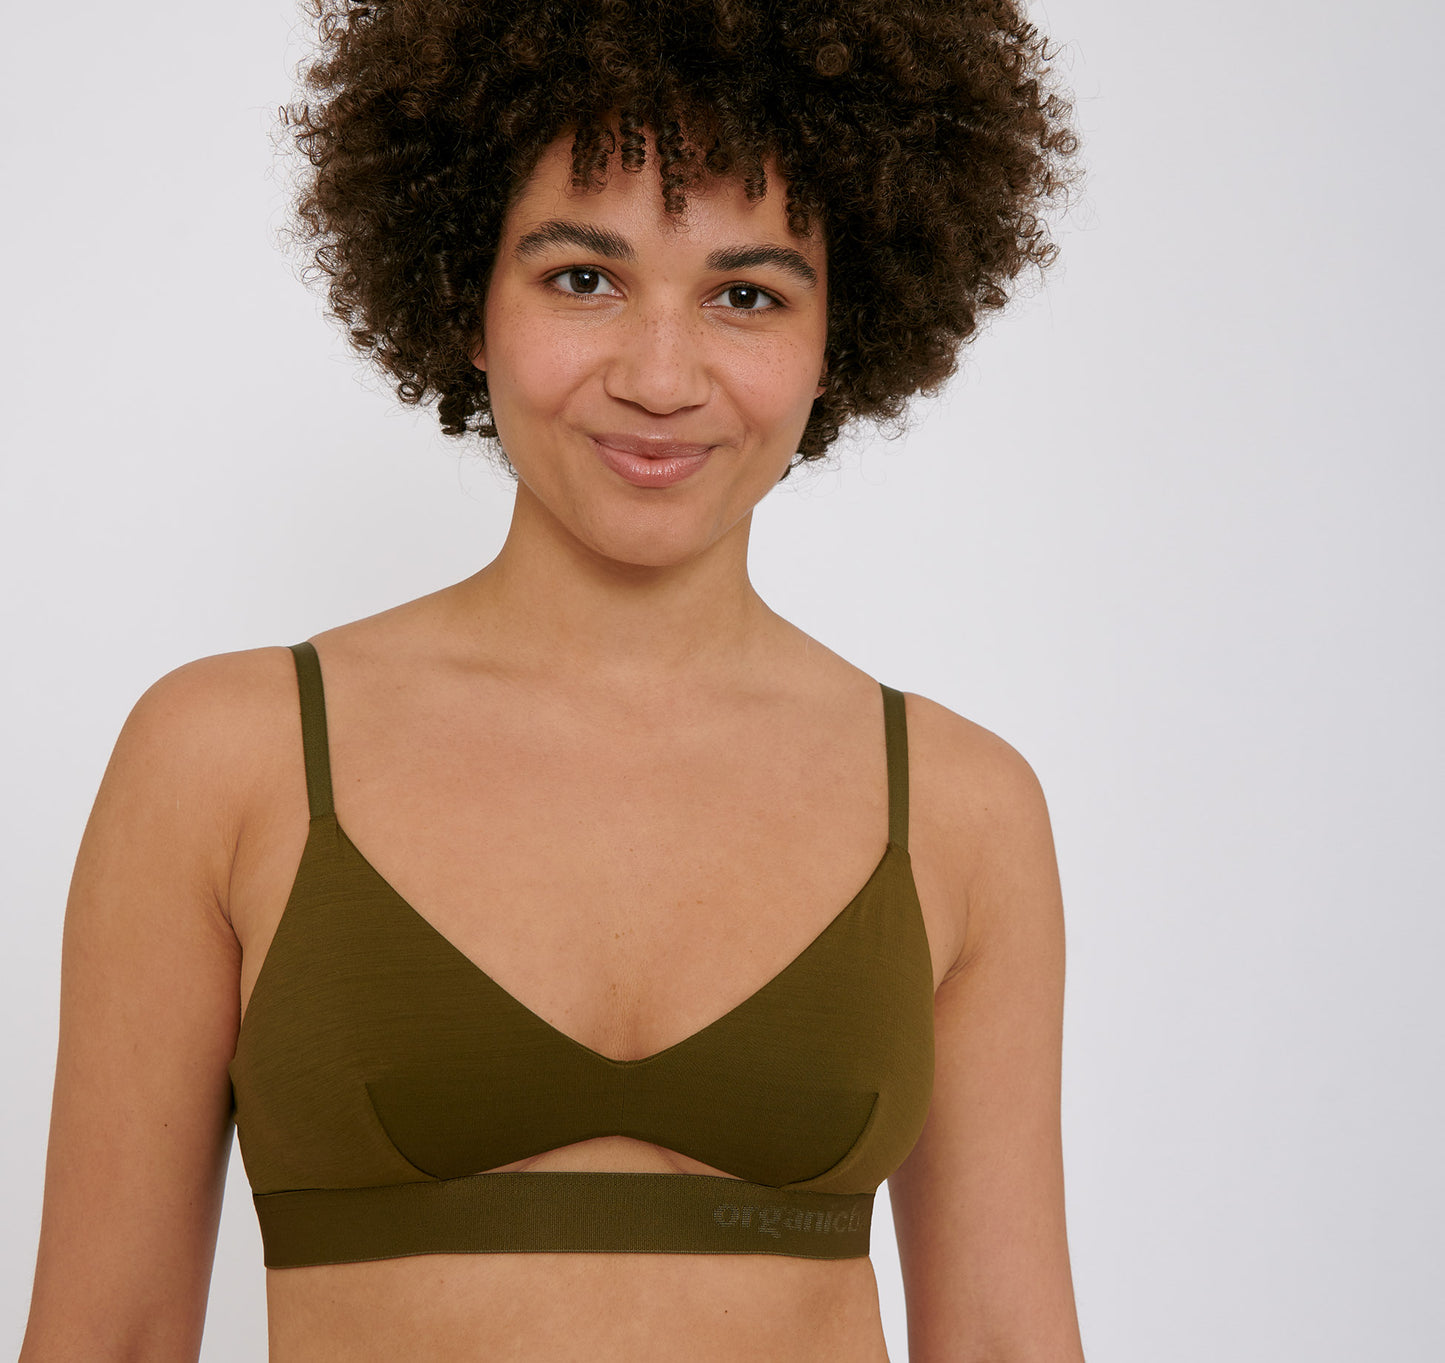 Soft Touch Bralette - Olive